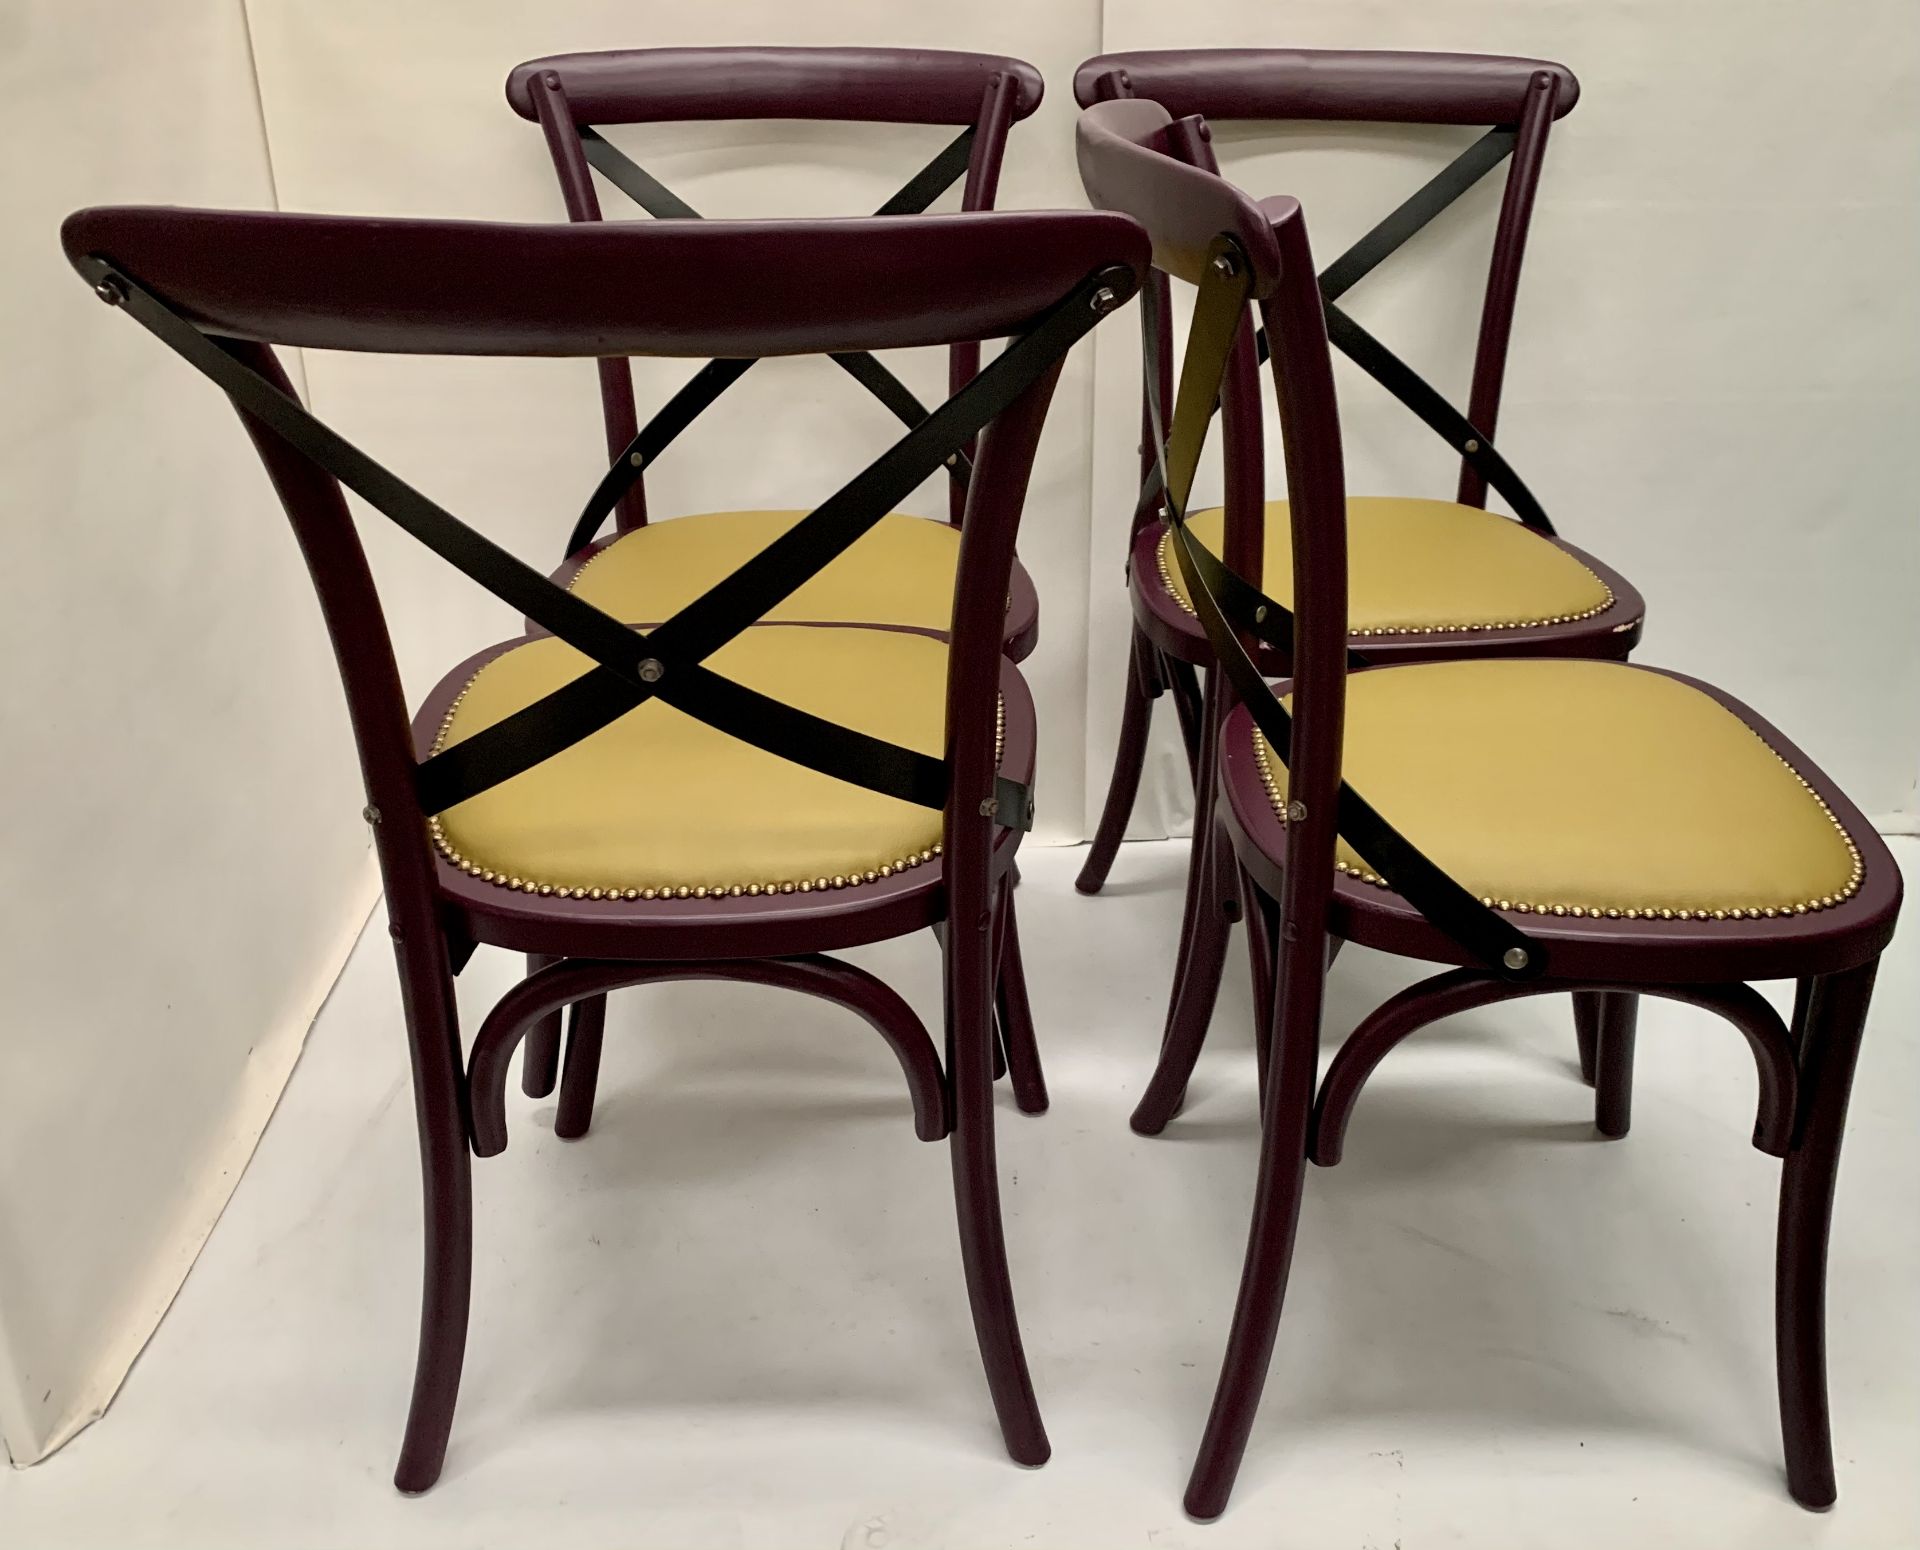 4 x Palm dark purple wooden dining chairs with raw coloured leather effect seats - 51cm x 55cm x - Image 3 of 3